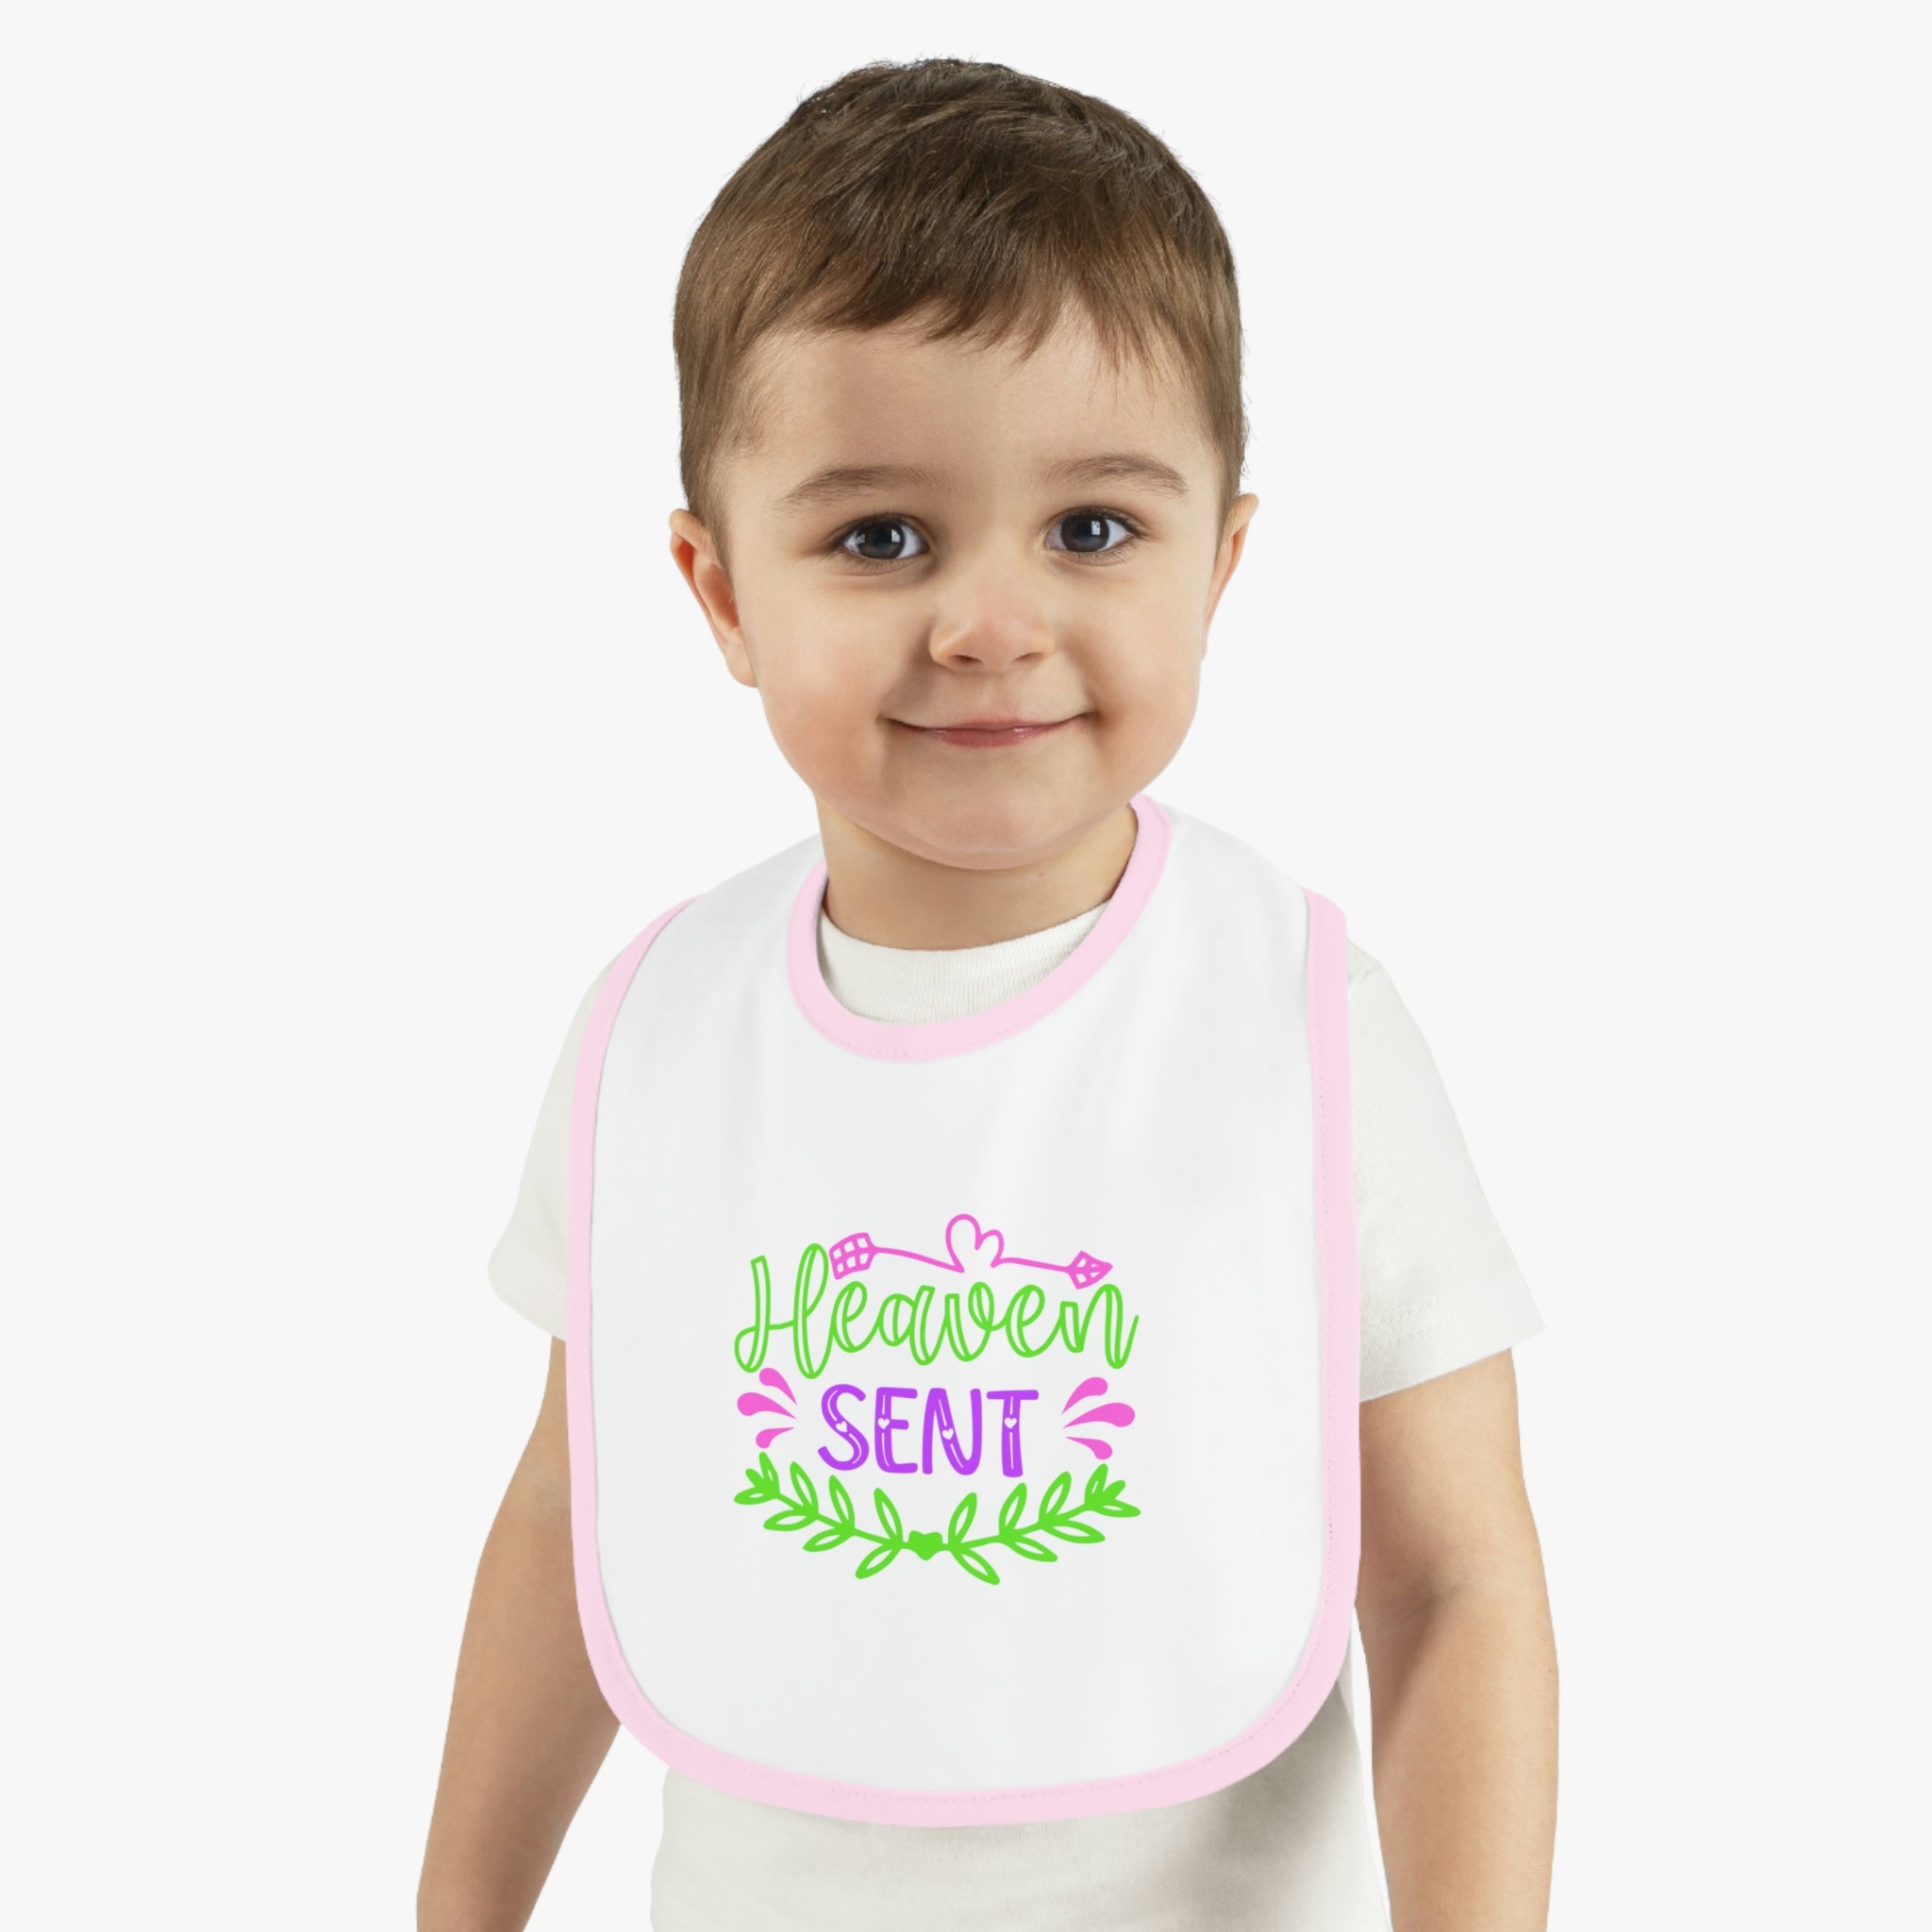 Heaven Sent Baby Jersey Bib Color: White/Pink Size: One size Jesus Passion Apparel